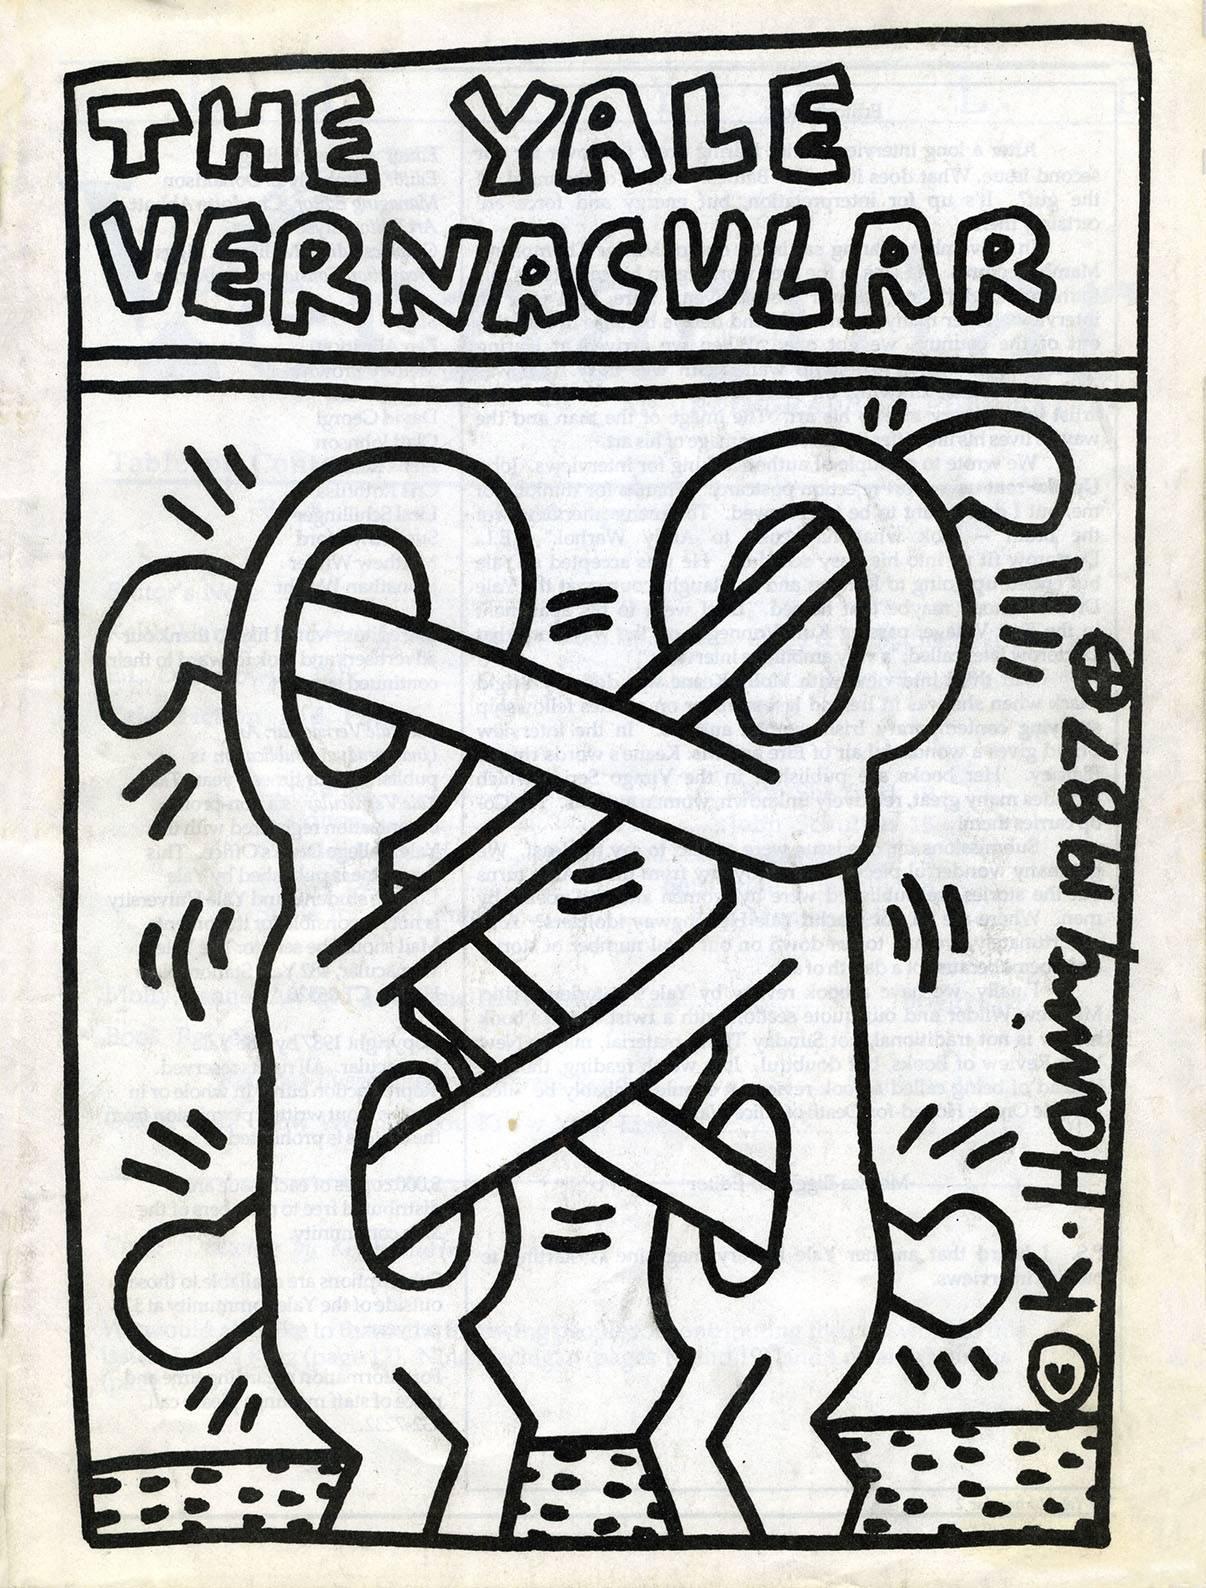 Keith Haring 1987:
The Yale Vernacular 1987, featuring classic cover art by Keith Haring. A rare stand-out vintage 1980s Keith Haring collectible that would look fantastic framed. Features a bold Keith Haring printed signature along the right